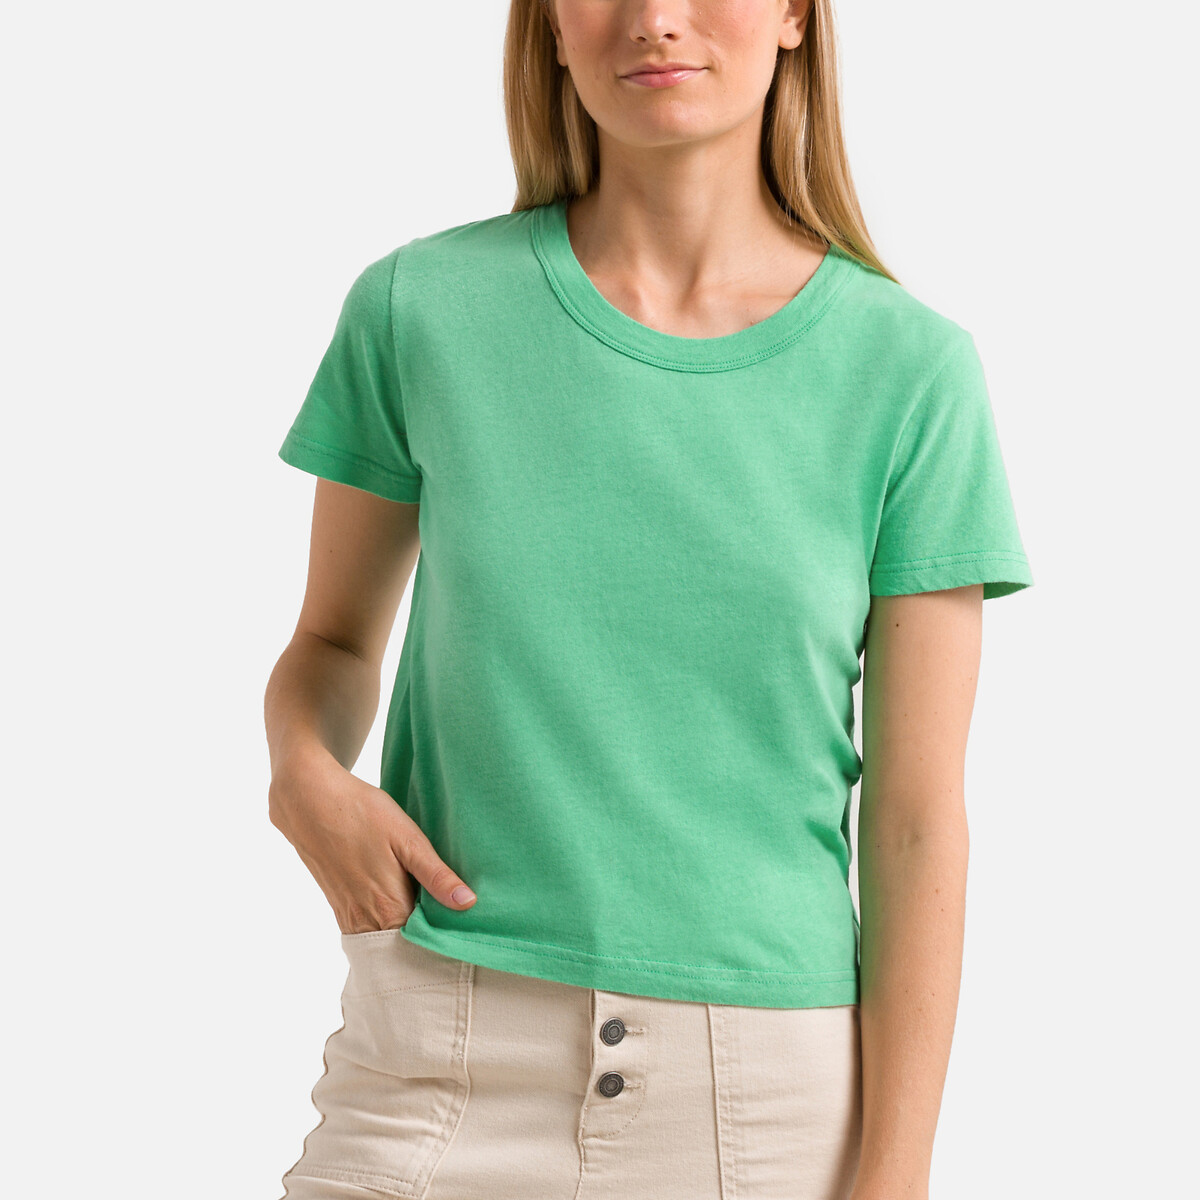 Gamipy Cotton T-Shirt with Crew Neck and Short Sleeves